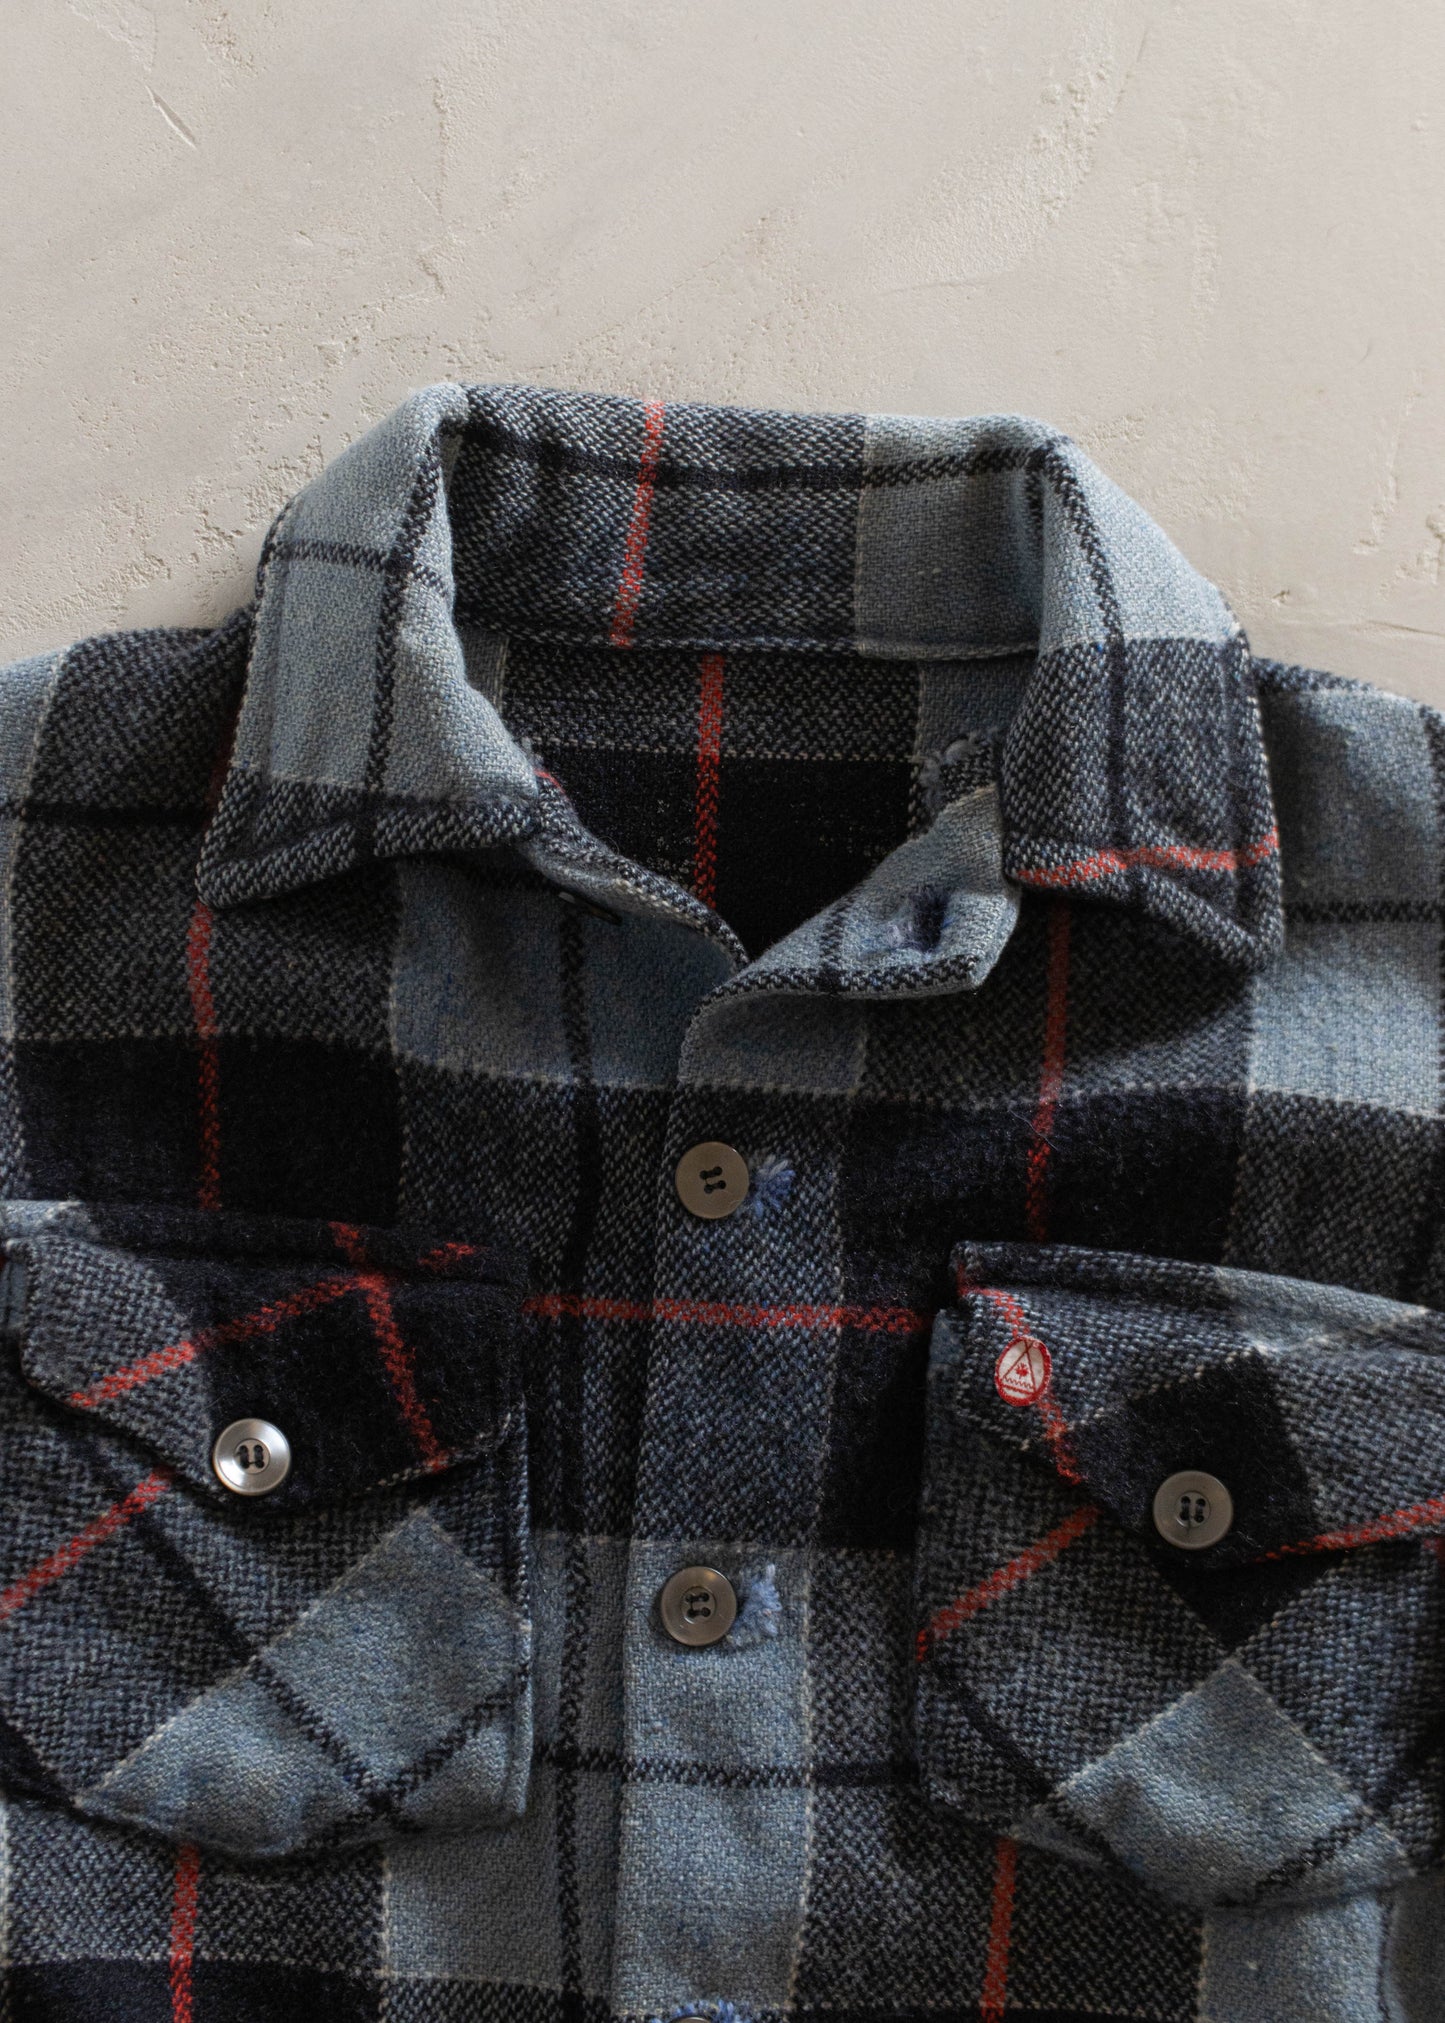 1980s Wool Flannel Button Up Shirt Size M/L